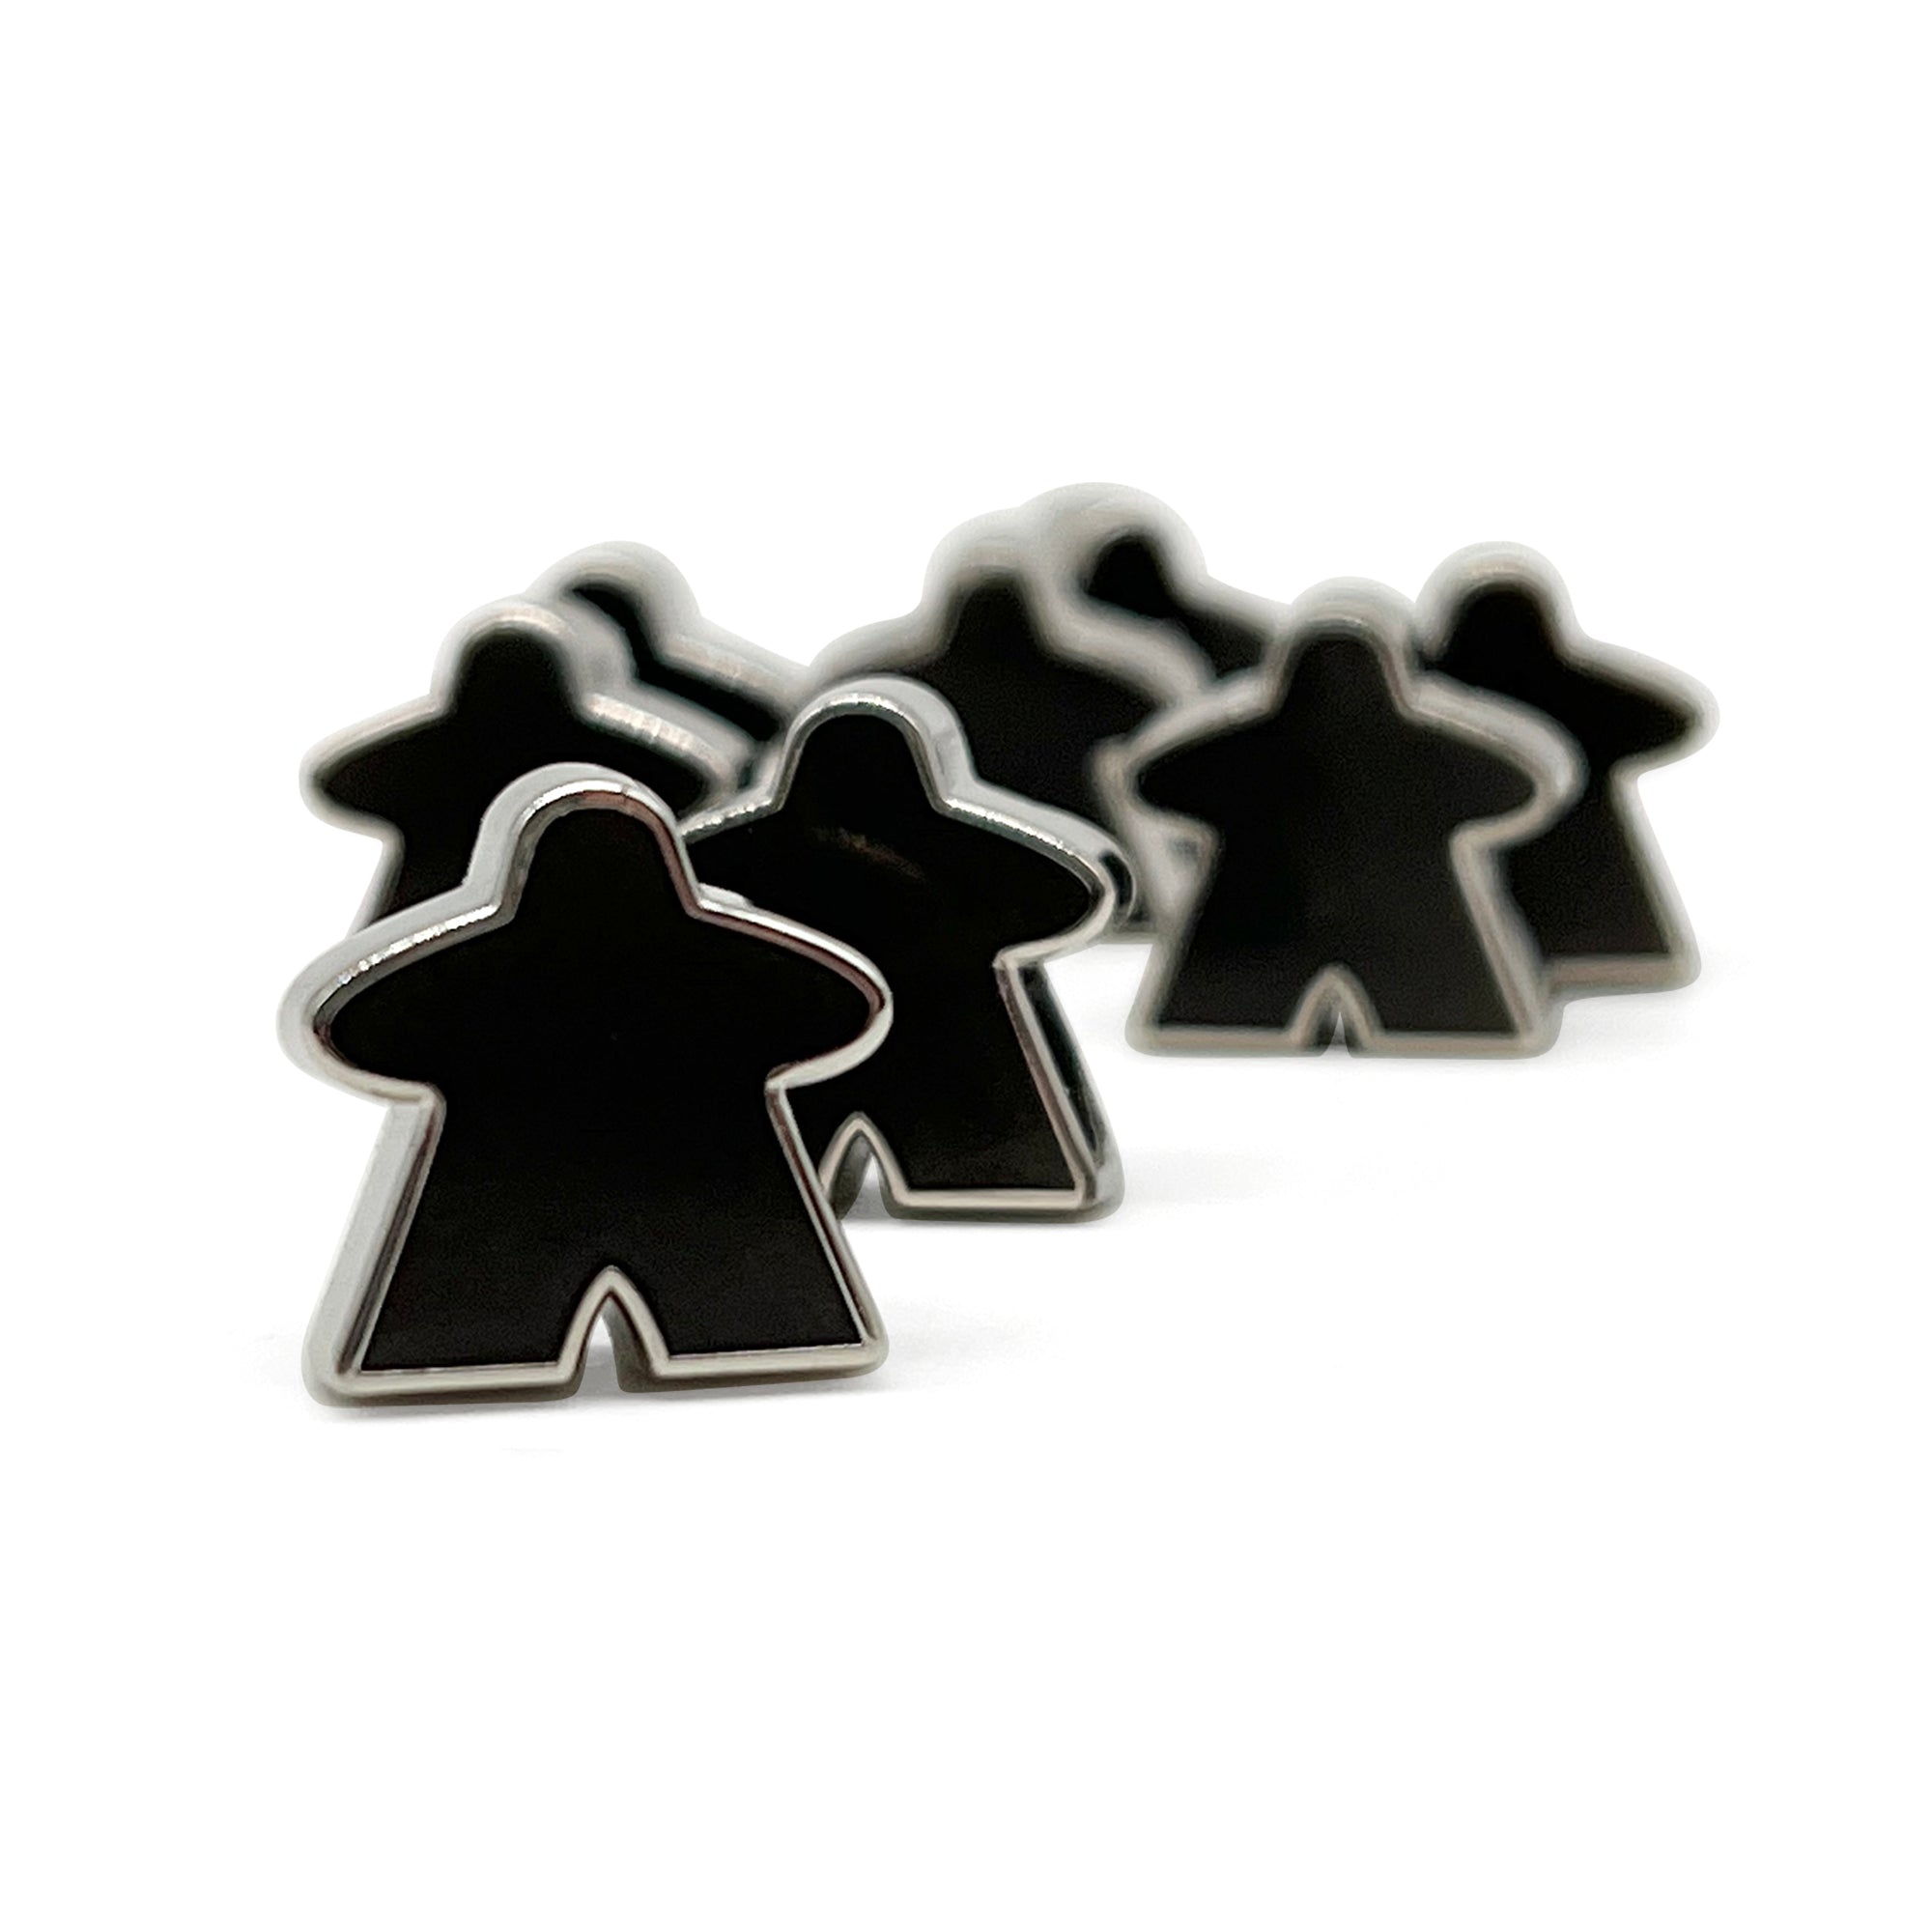 8 Pack of Black Enamel Meeples by Norse Foundry